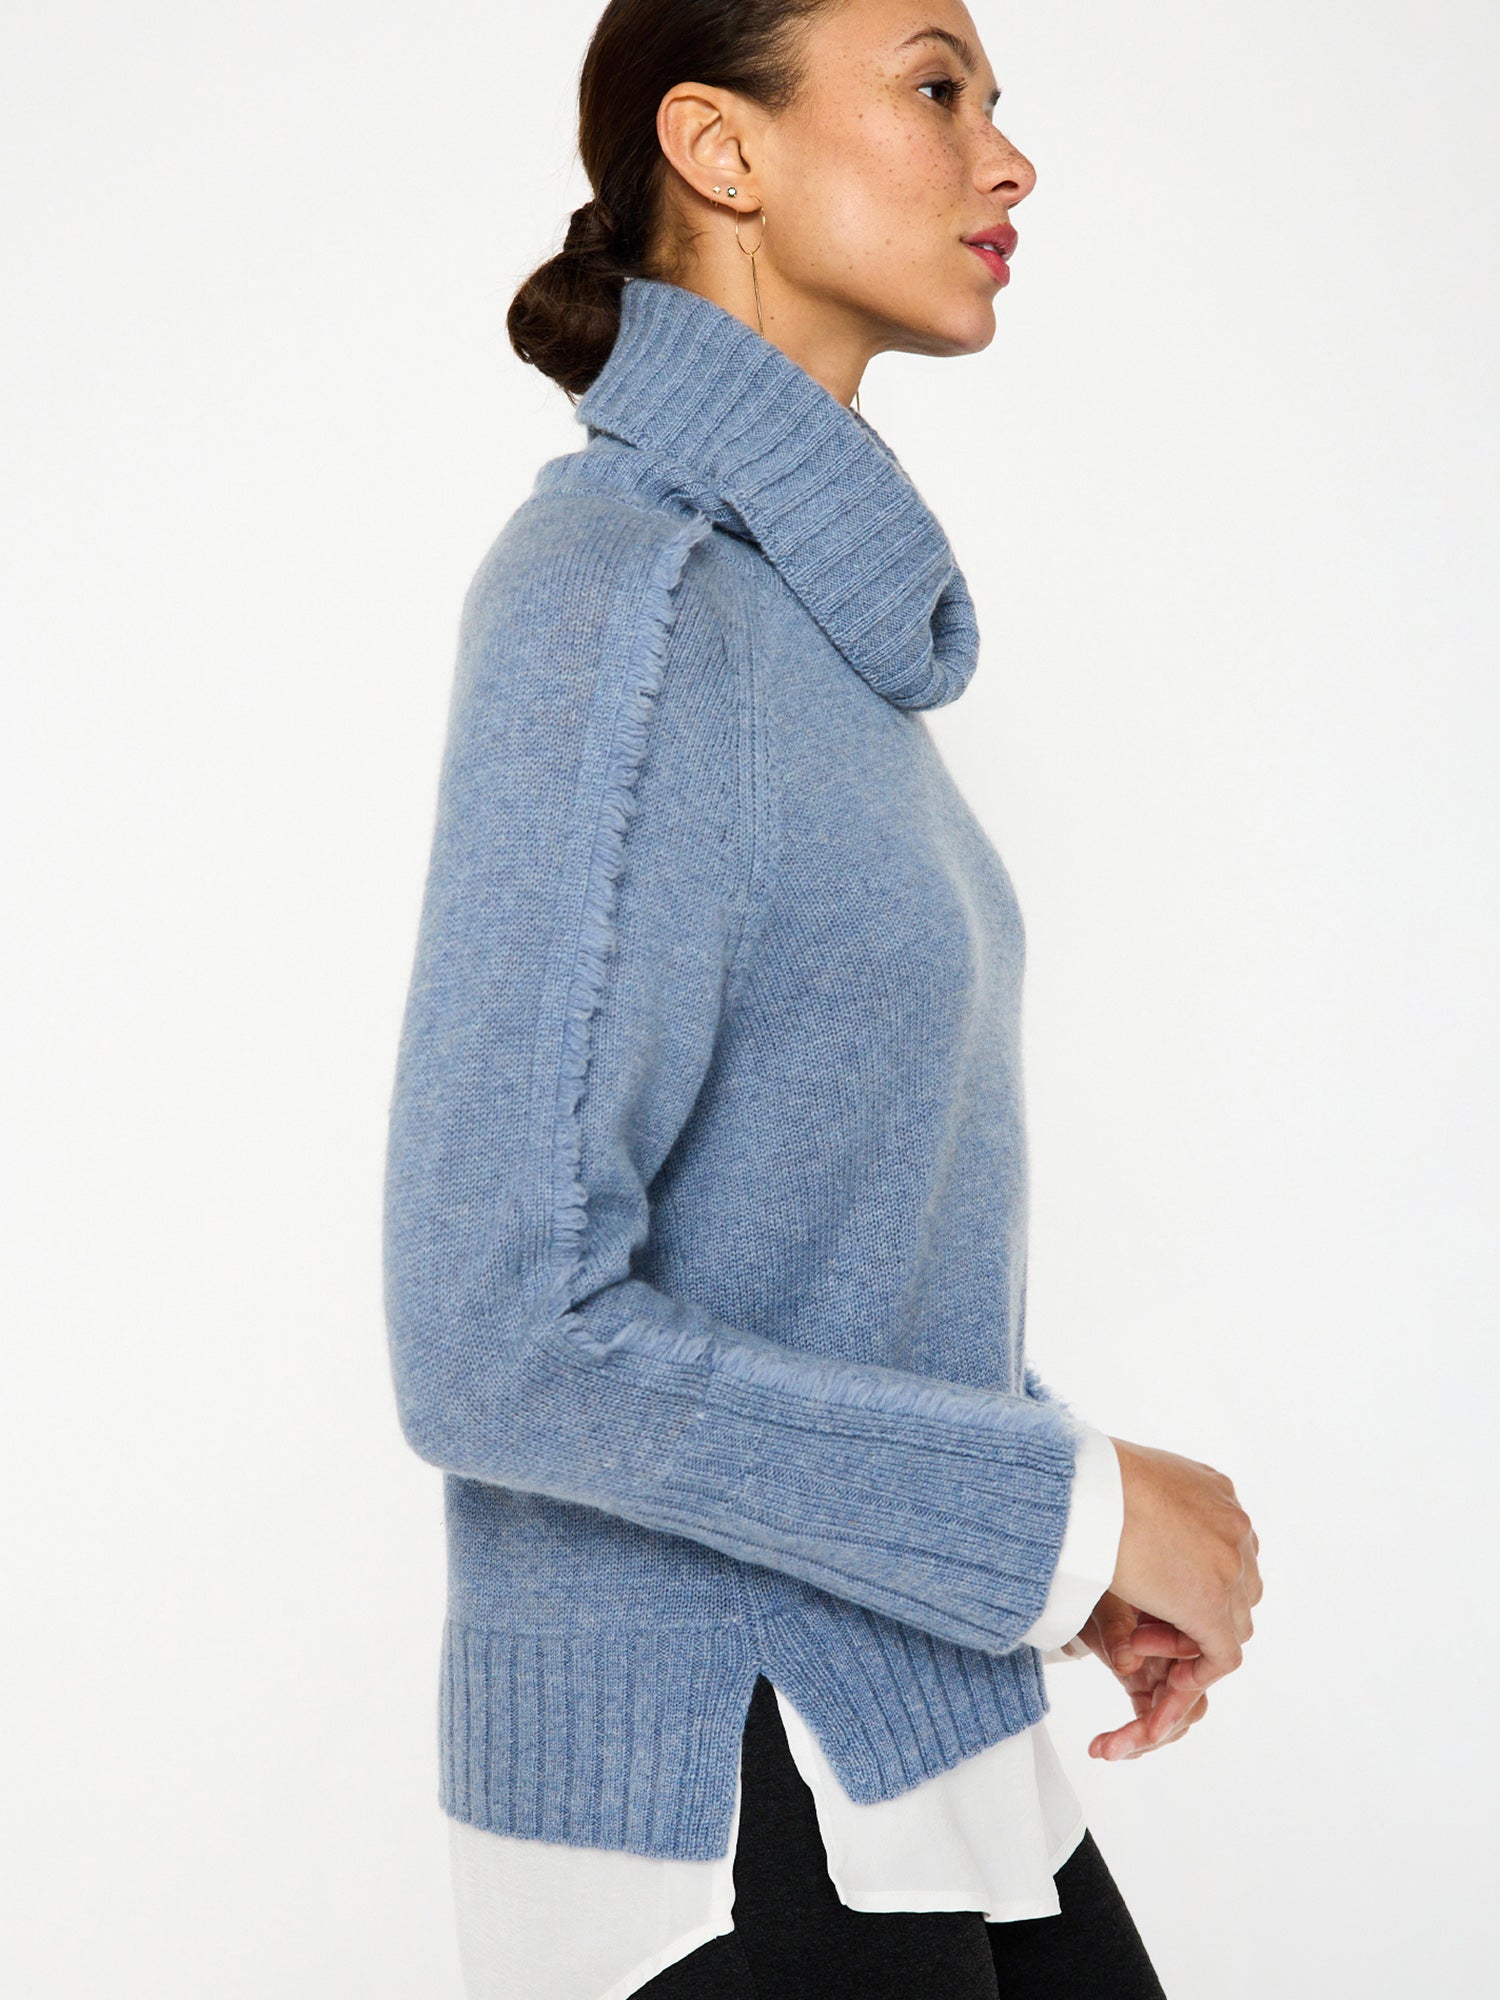 Jolie blue layered turtleneck sweater side view